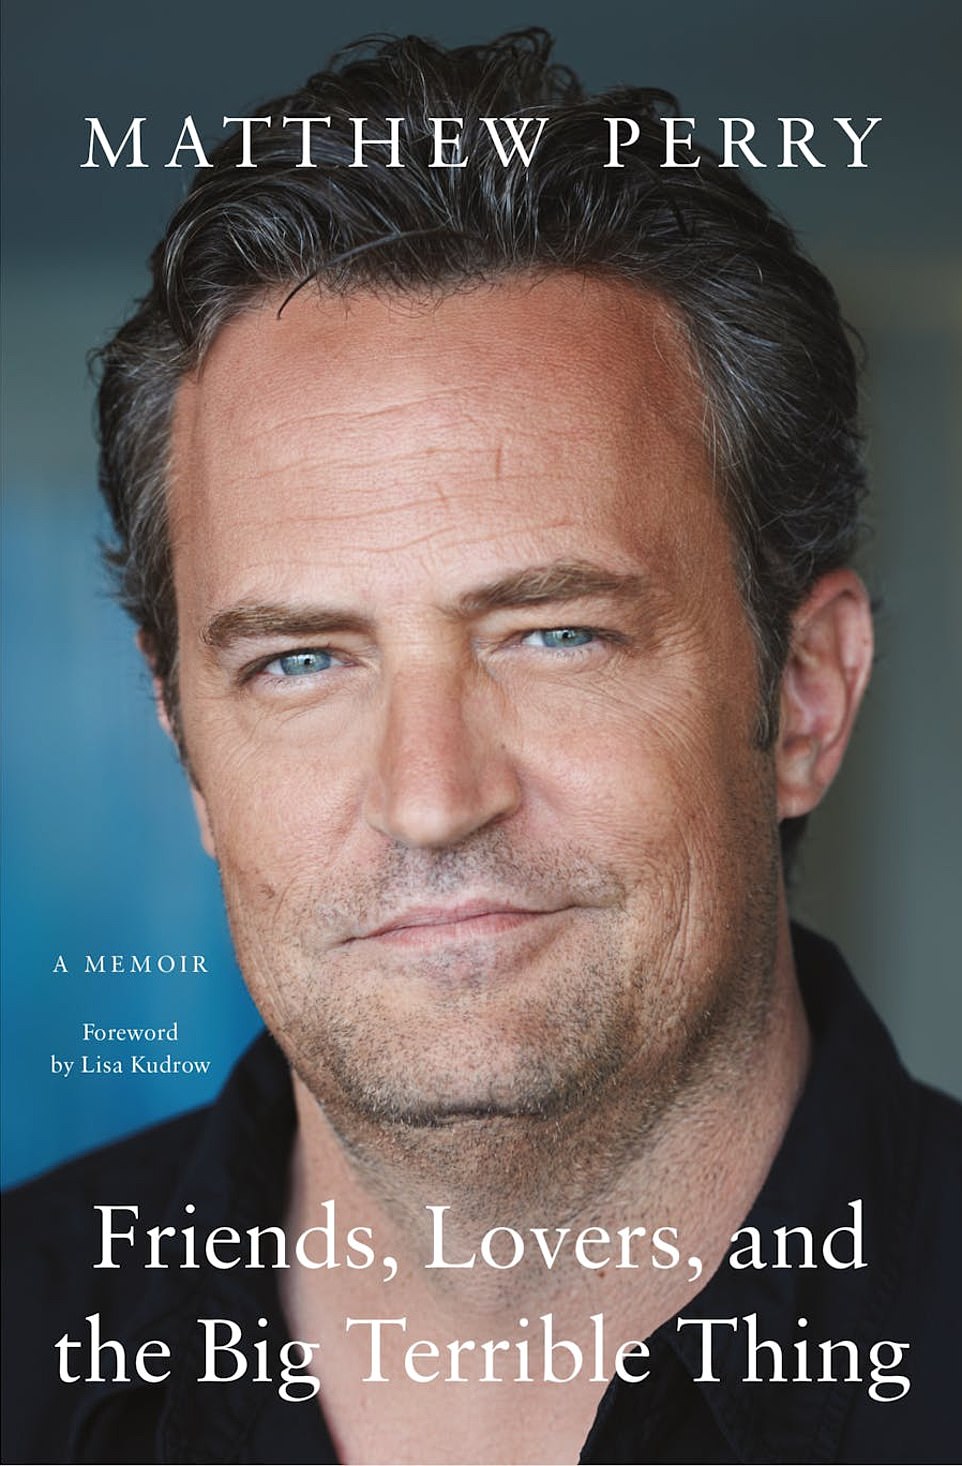 Last year, he published a memoir titled Friends, Lovers, and the Big Terrible Thing: A Memoir